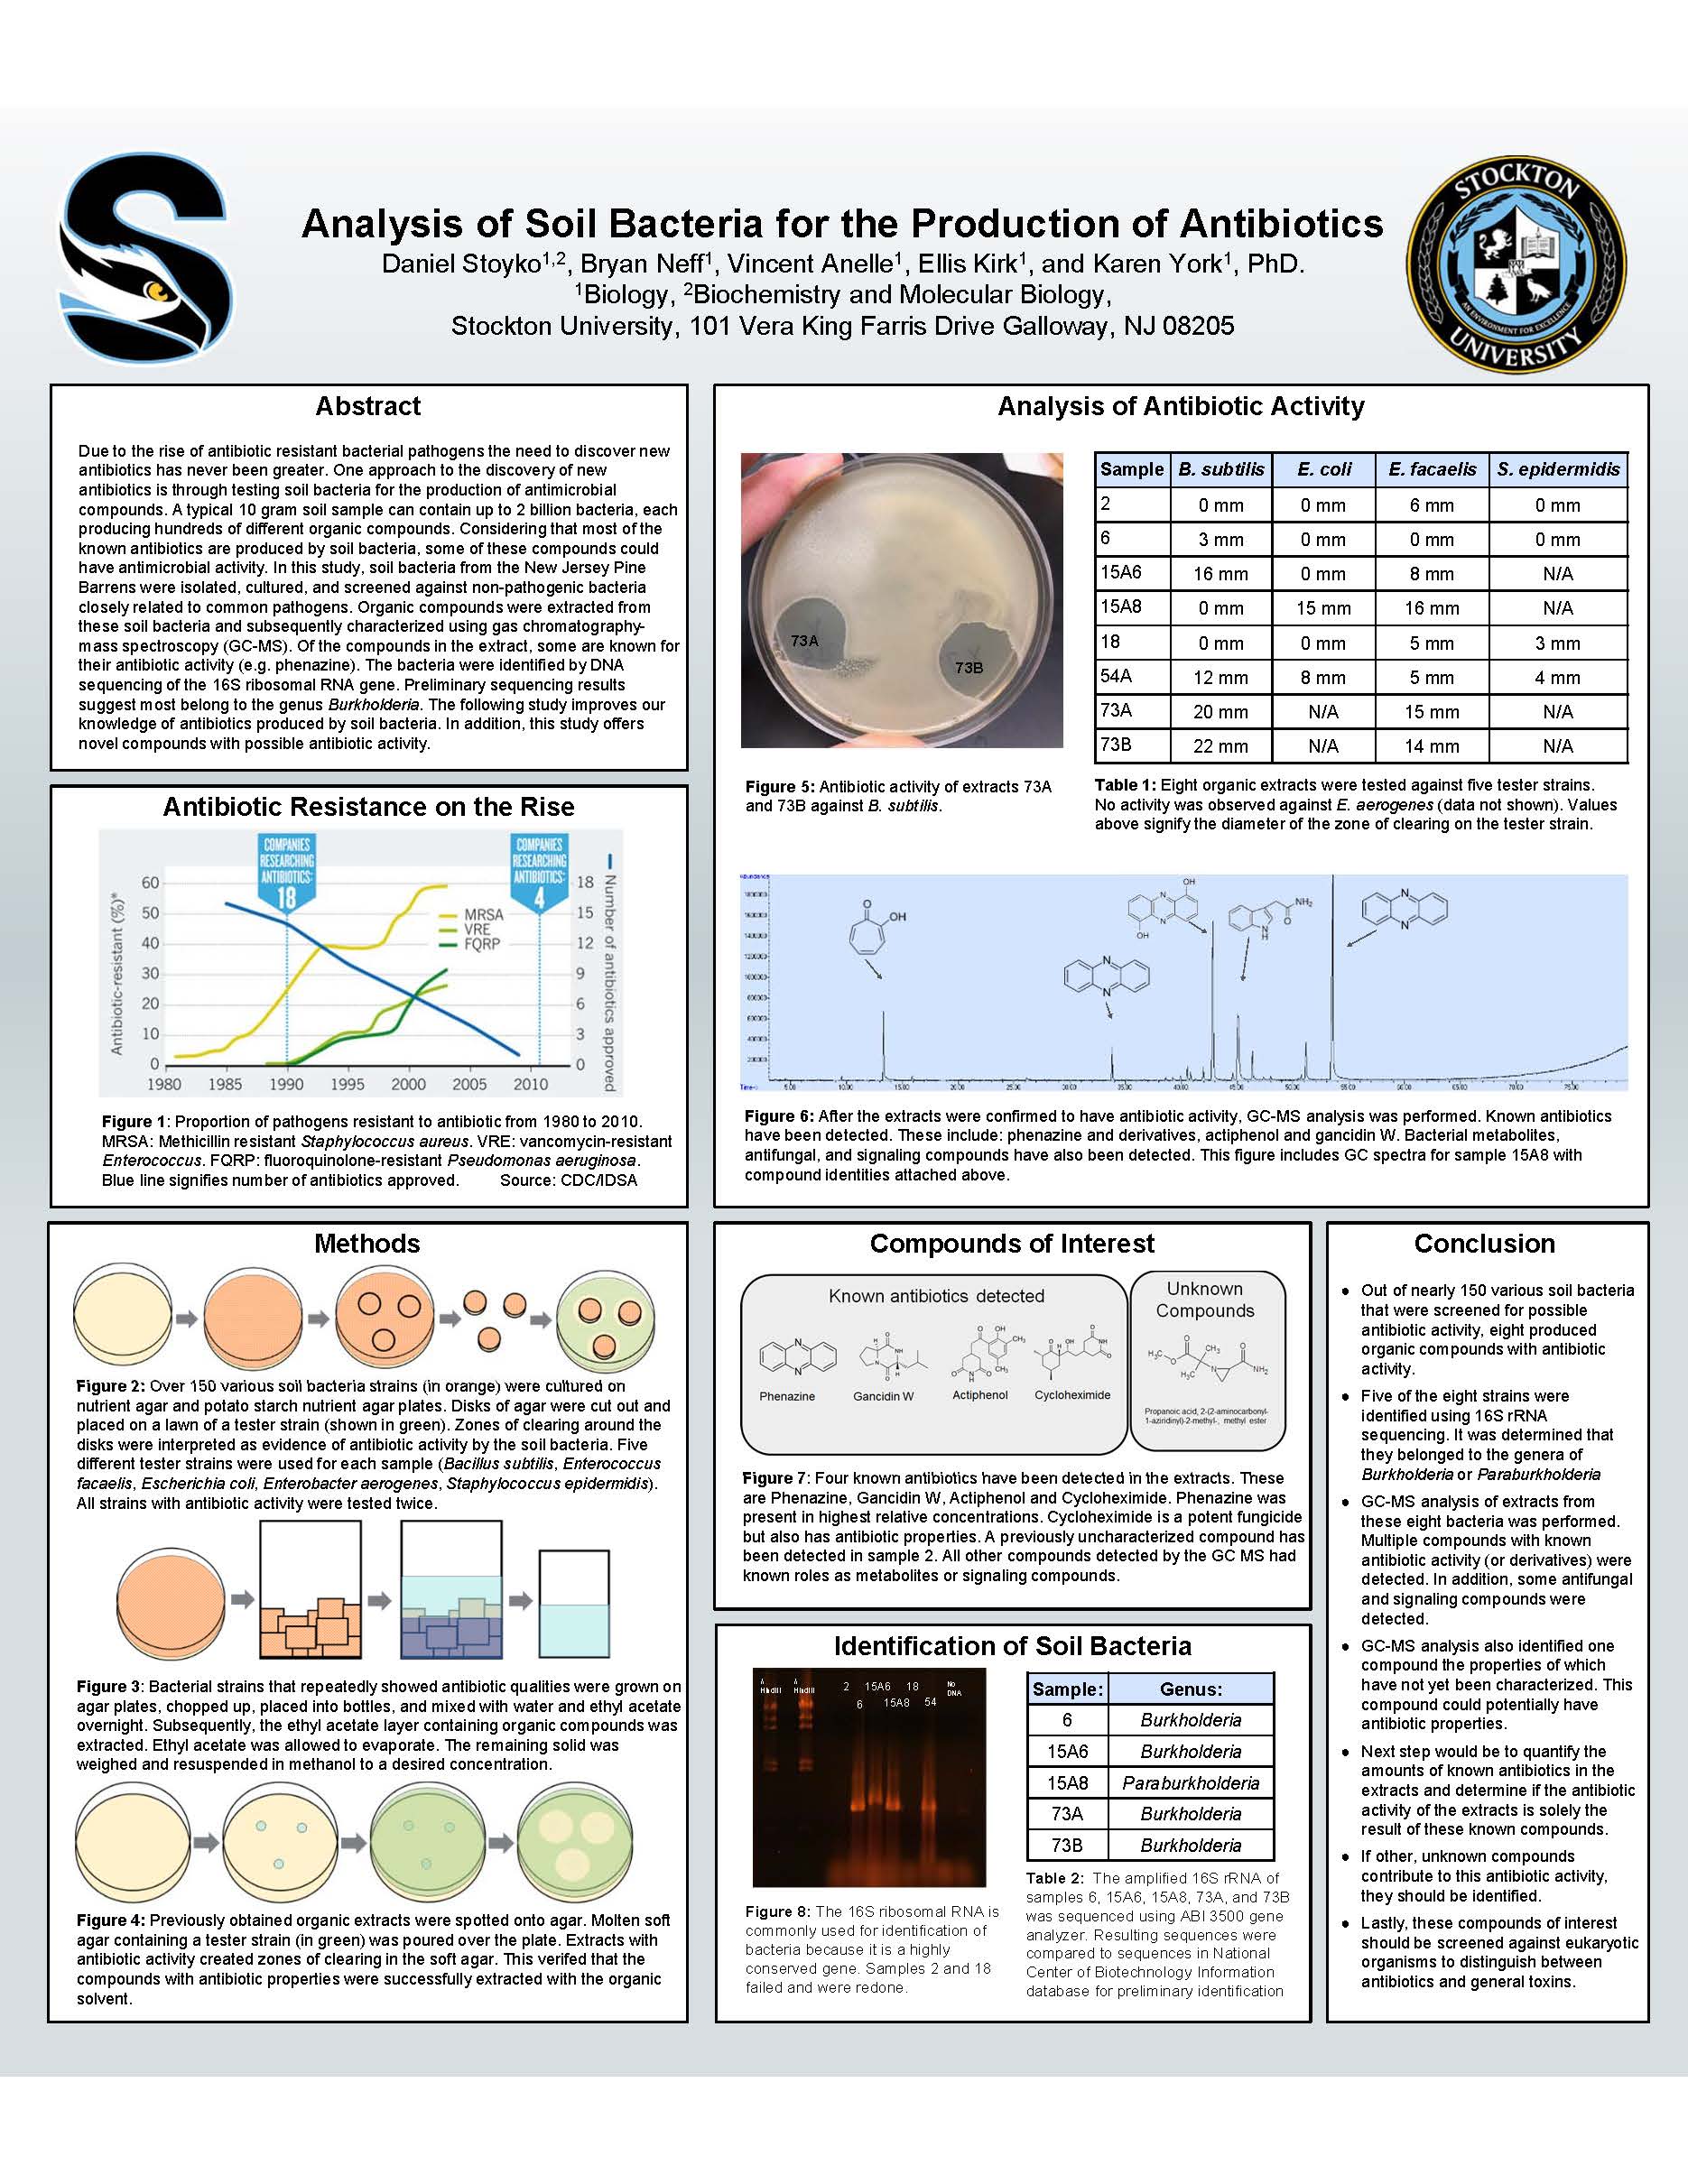 Image of first place 2019 NAMS symposium poster